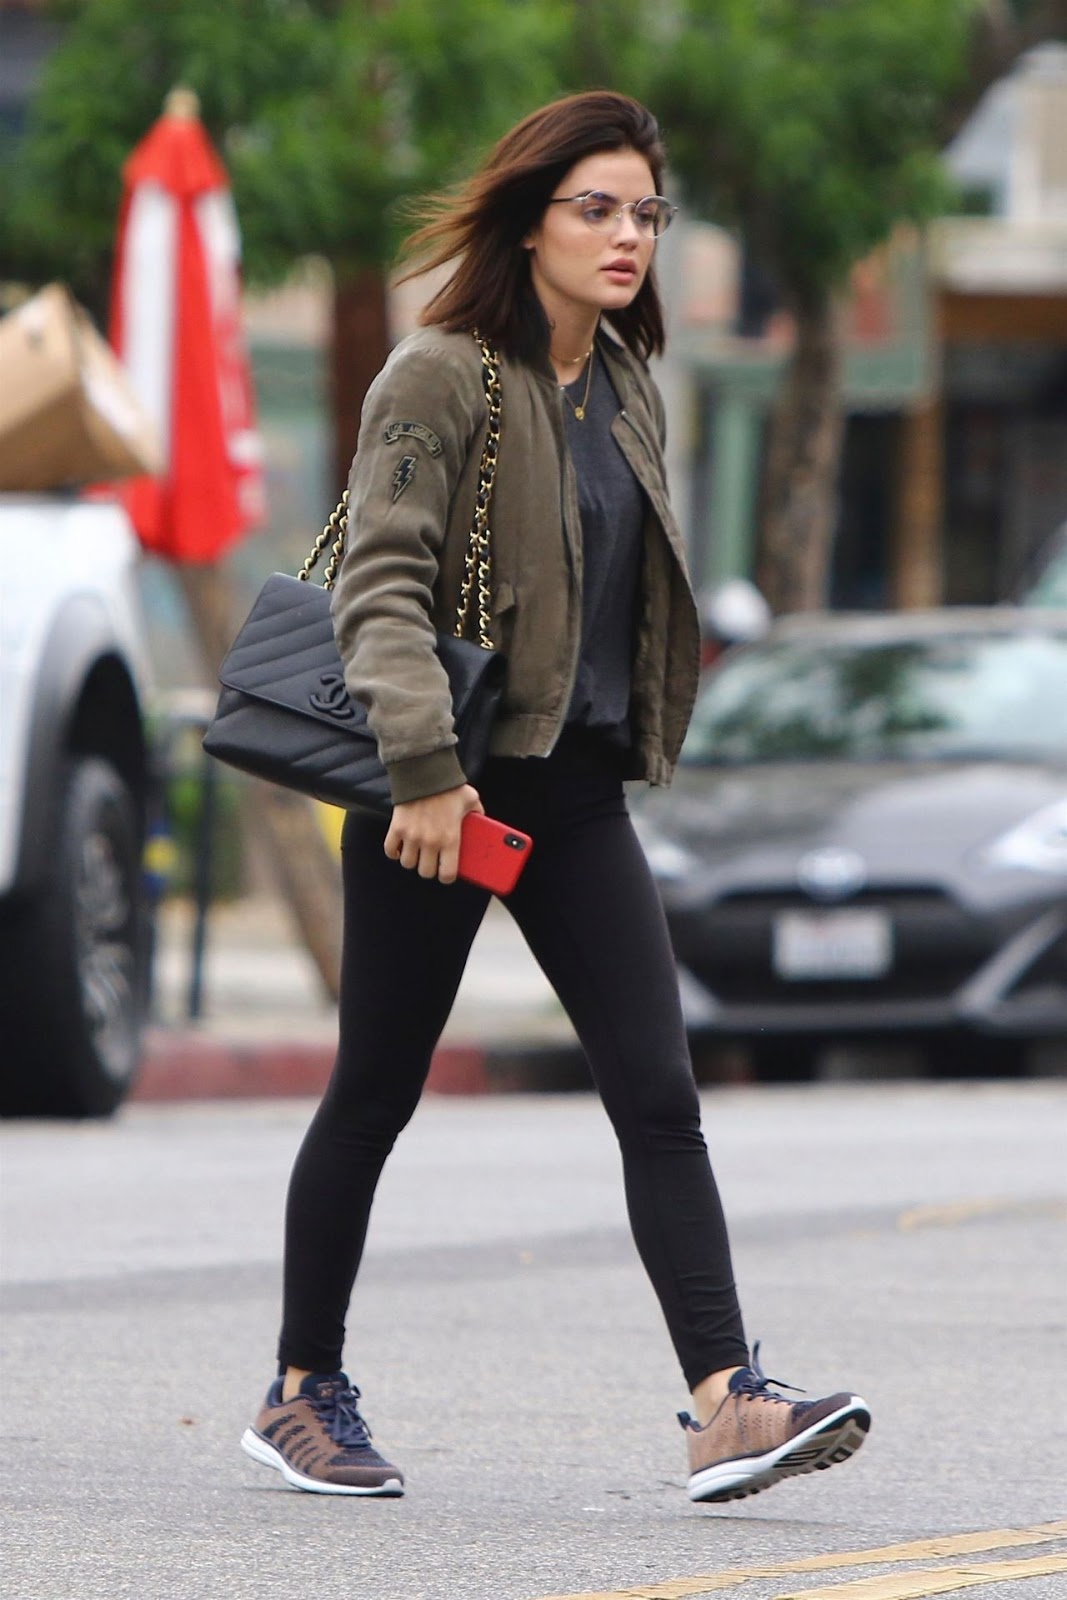 Lucy Hale high street style in bomber jacket photo